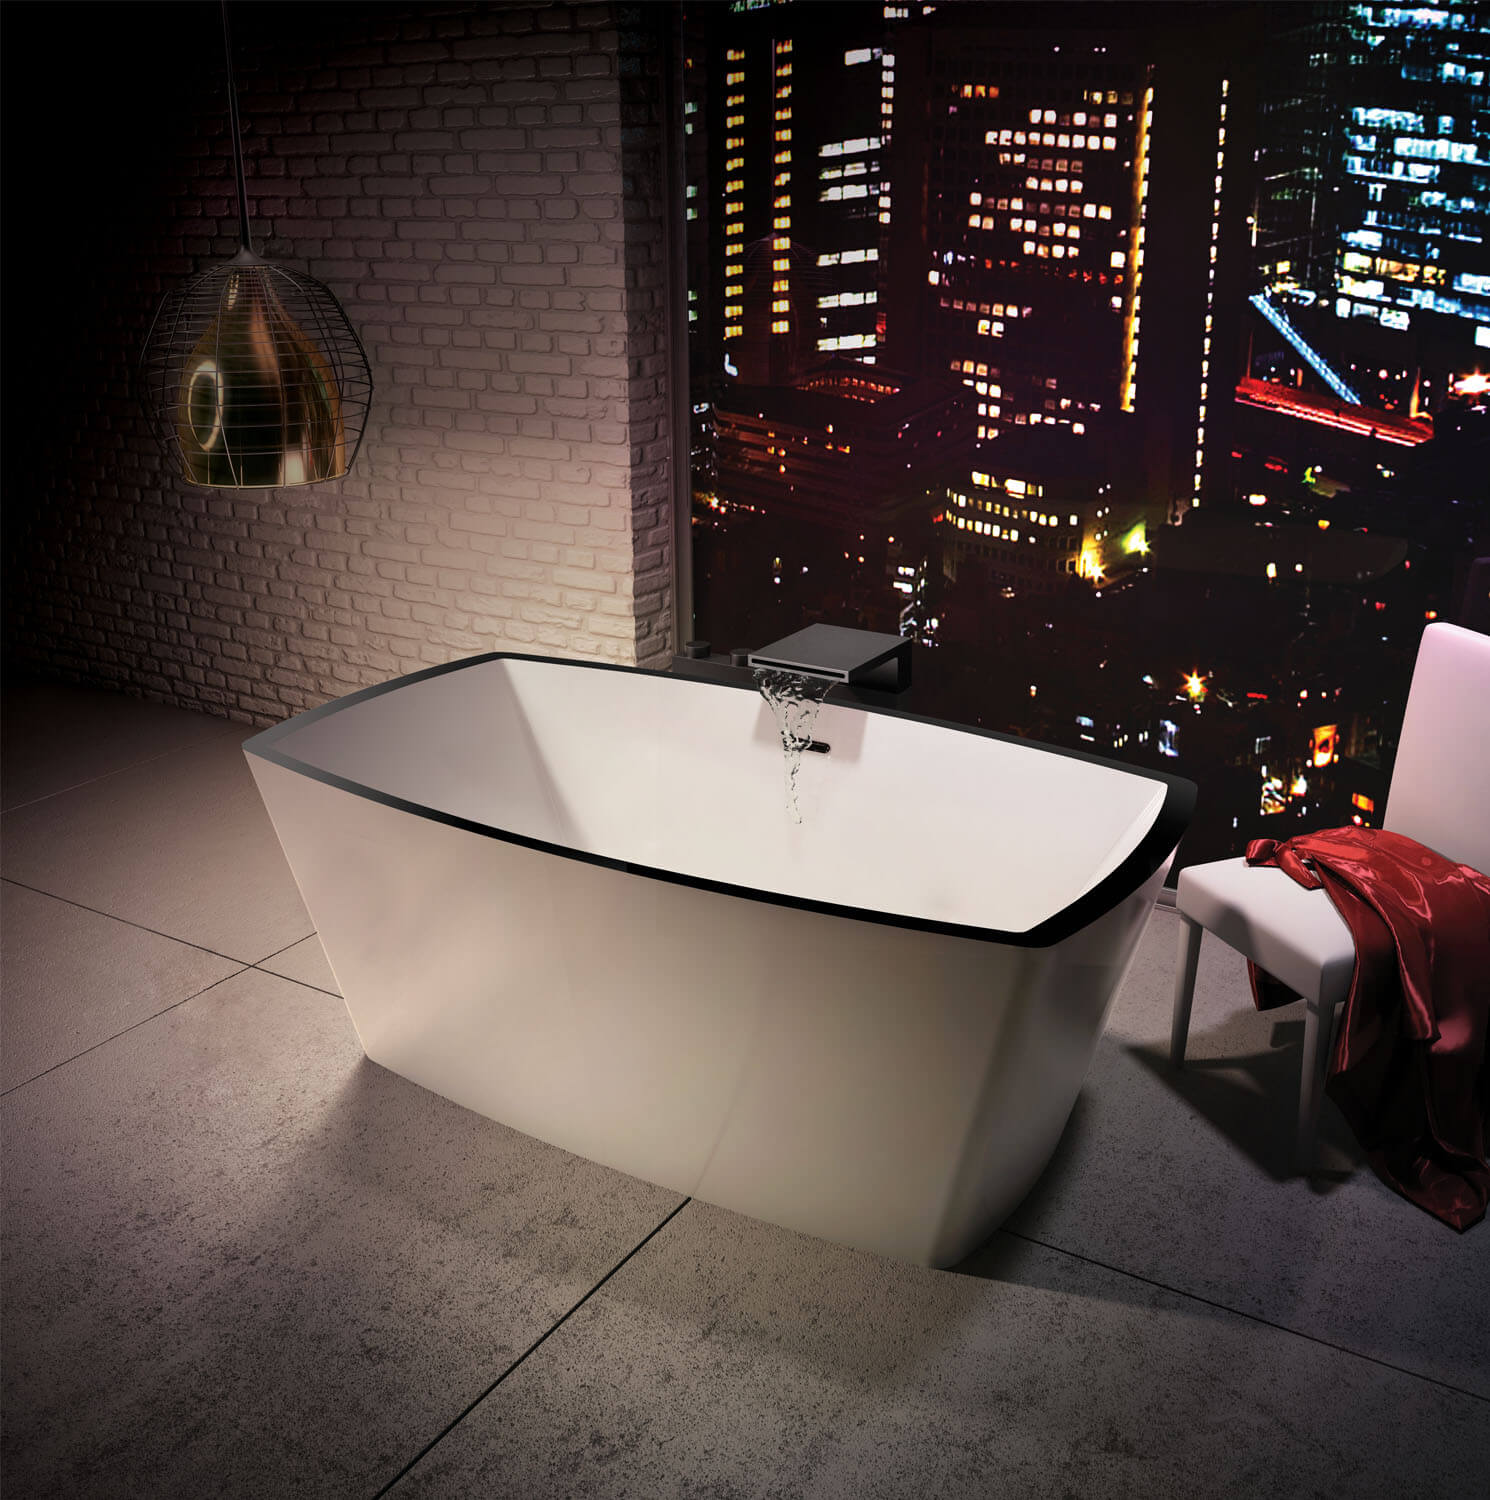 Bainultra Charism 6434 two person freestanding air jet bathtub for your master bathroo